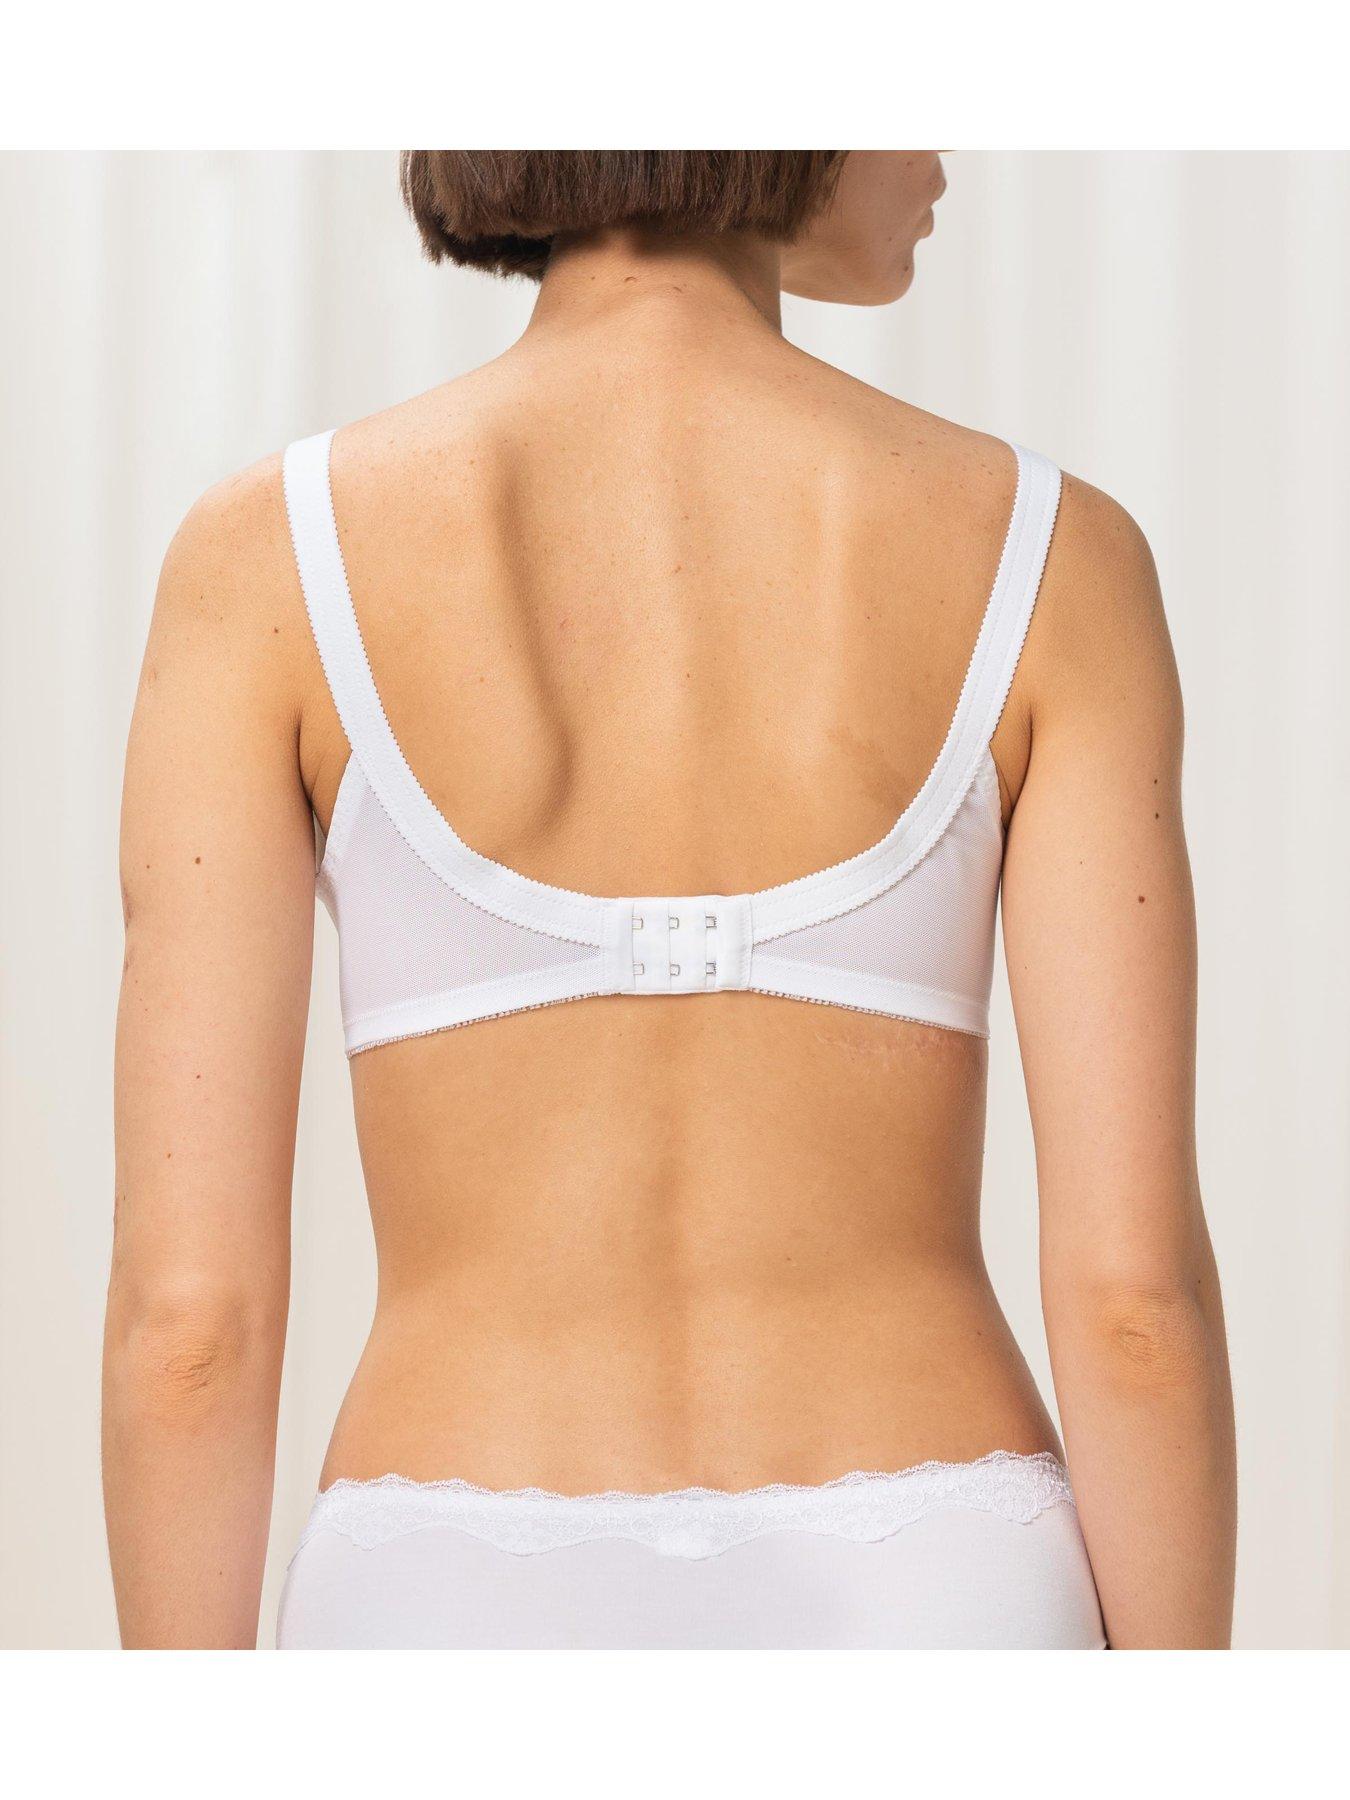 Buy TRIUMPH White Wired Fixed Straps Heavily Padded Women's Every Day Bra